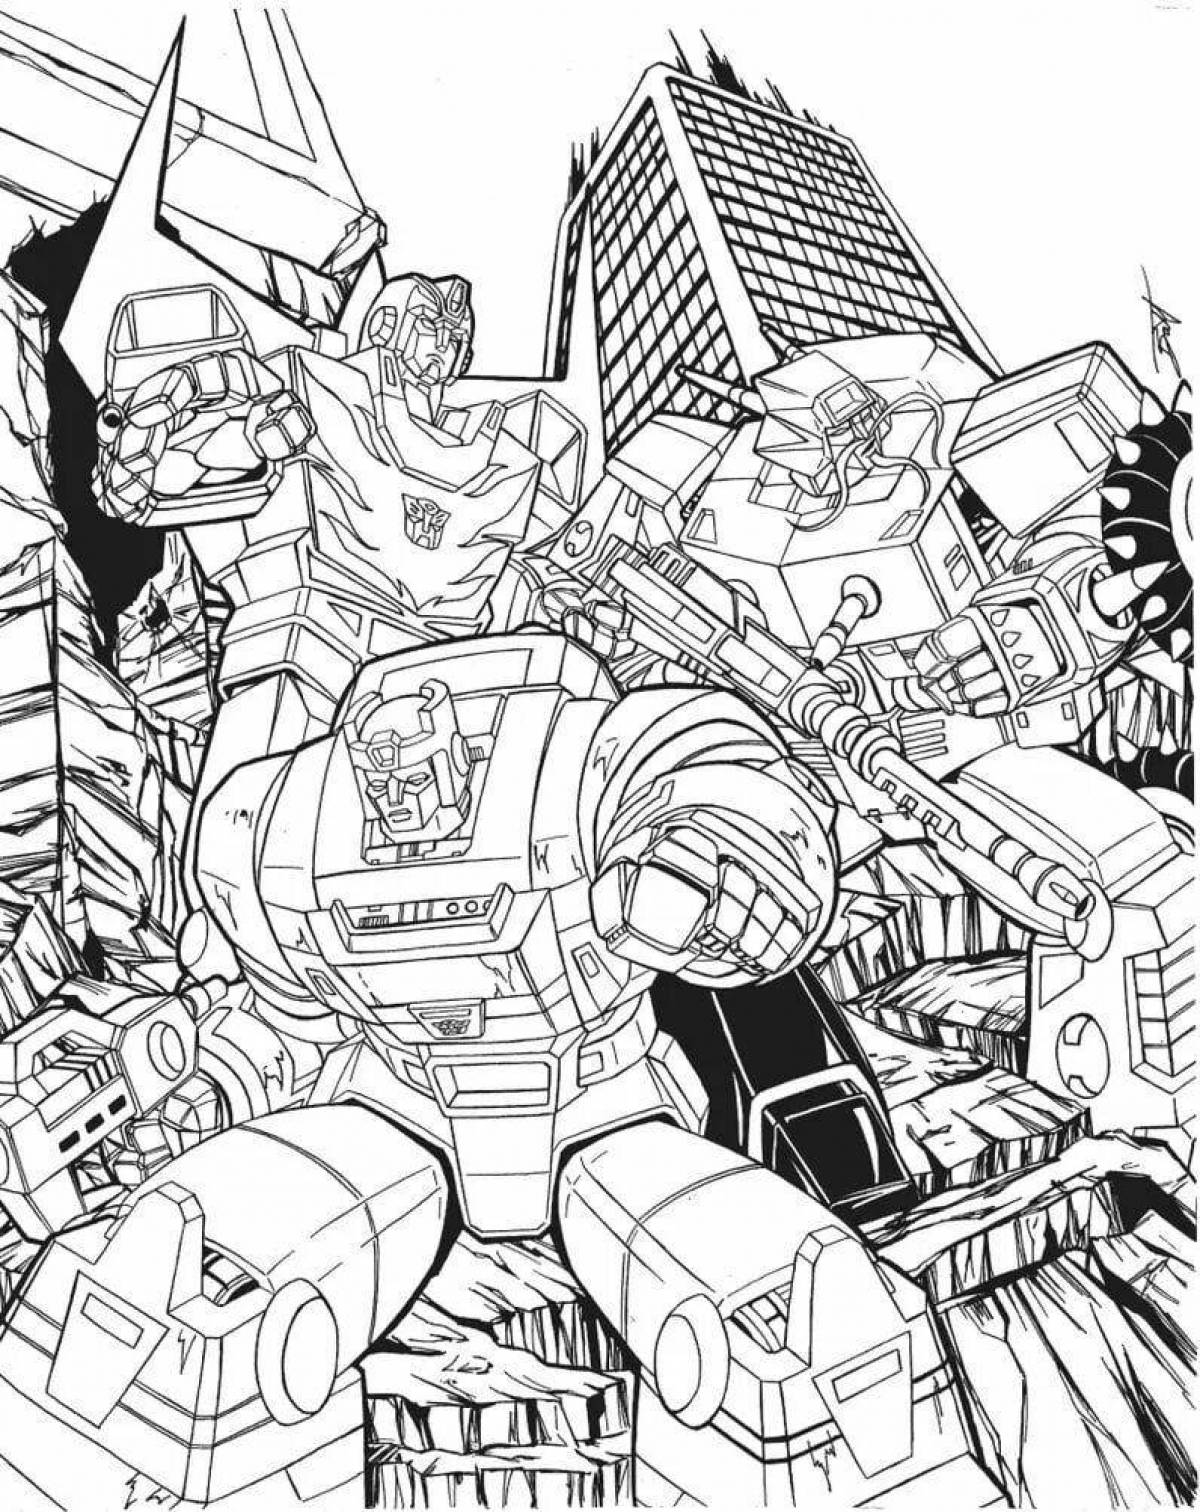 Fun coloring page for complex robots